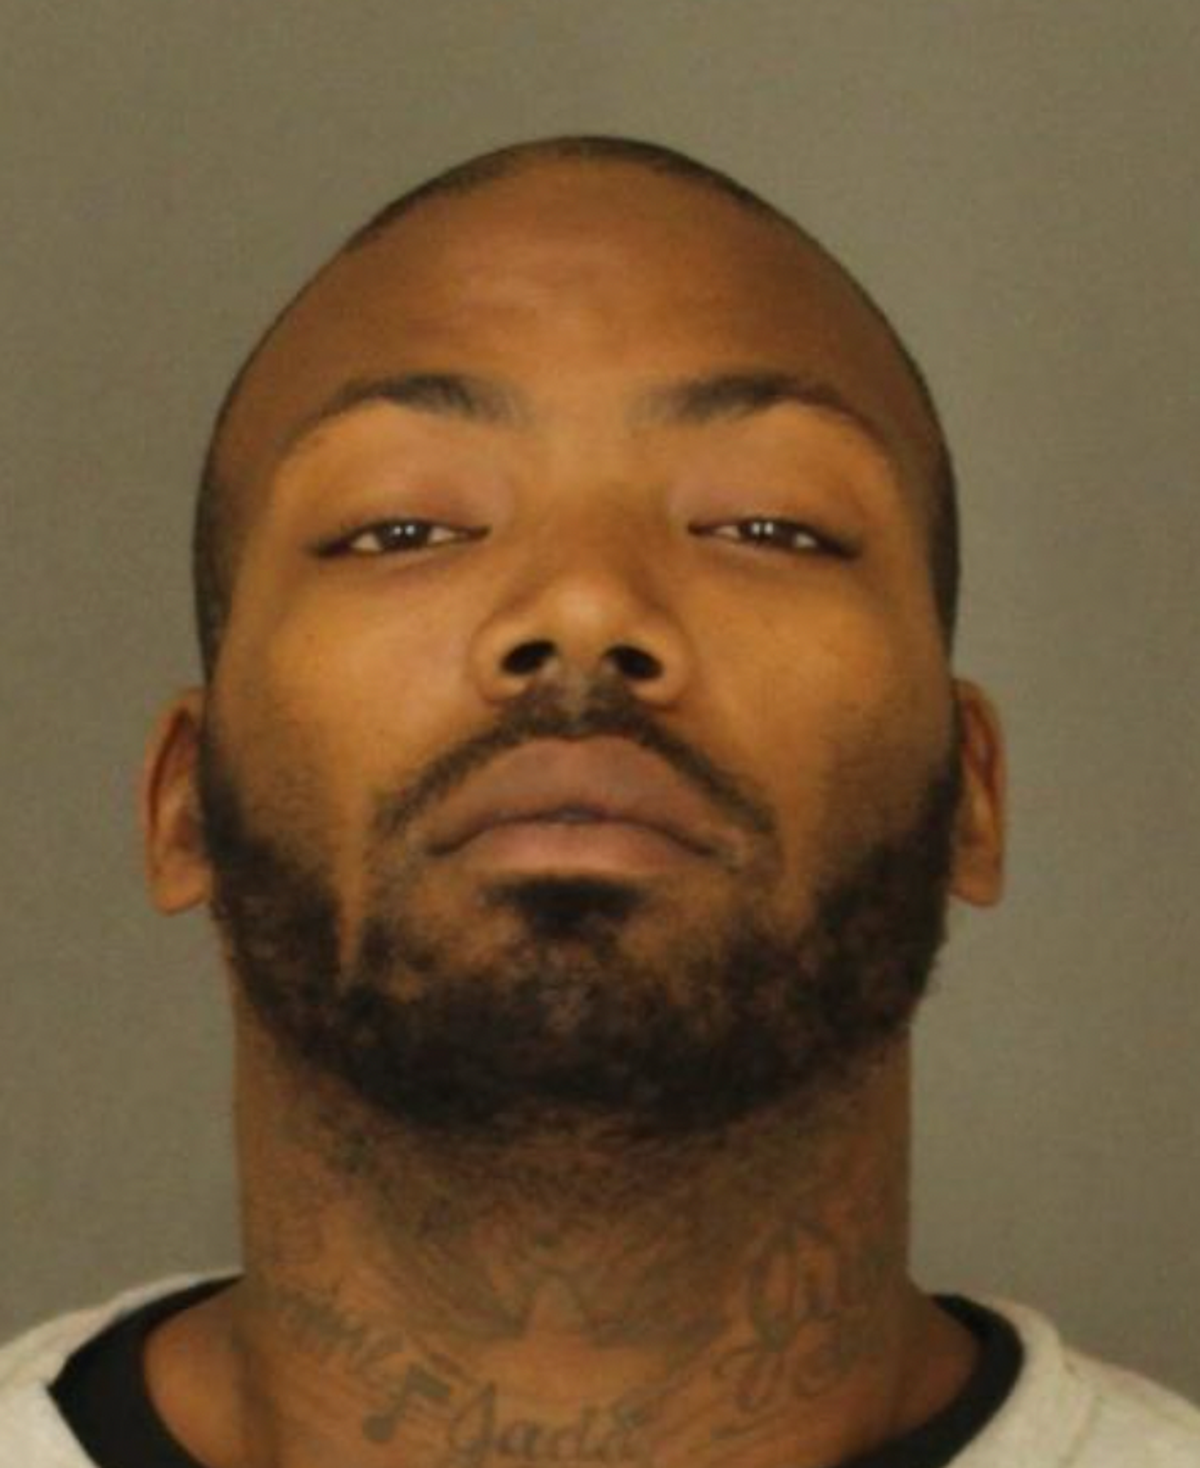 Jason Billingsley in a new mugshot provided by the Baltimore Police Department (BPD)